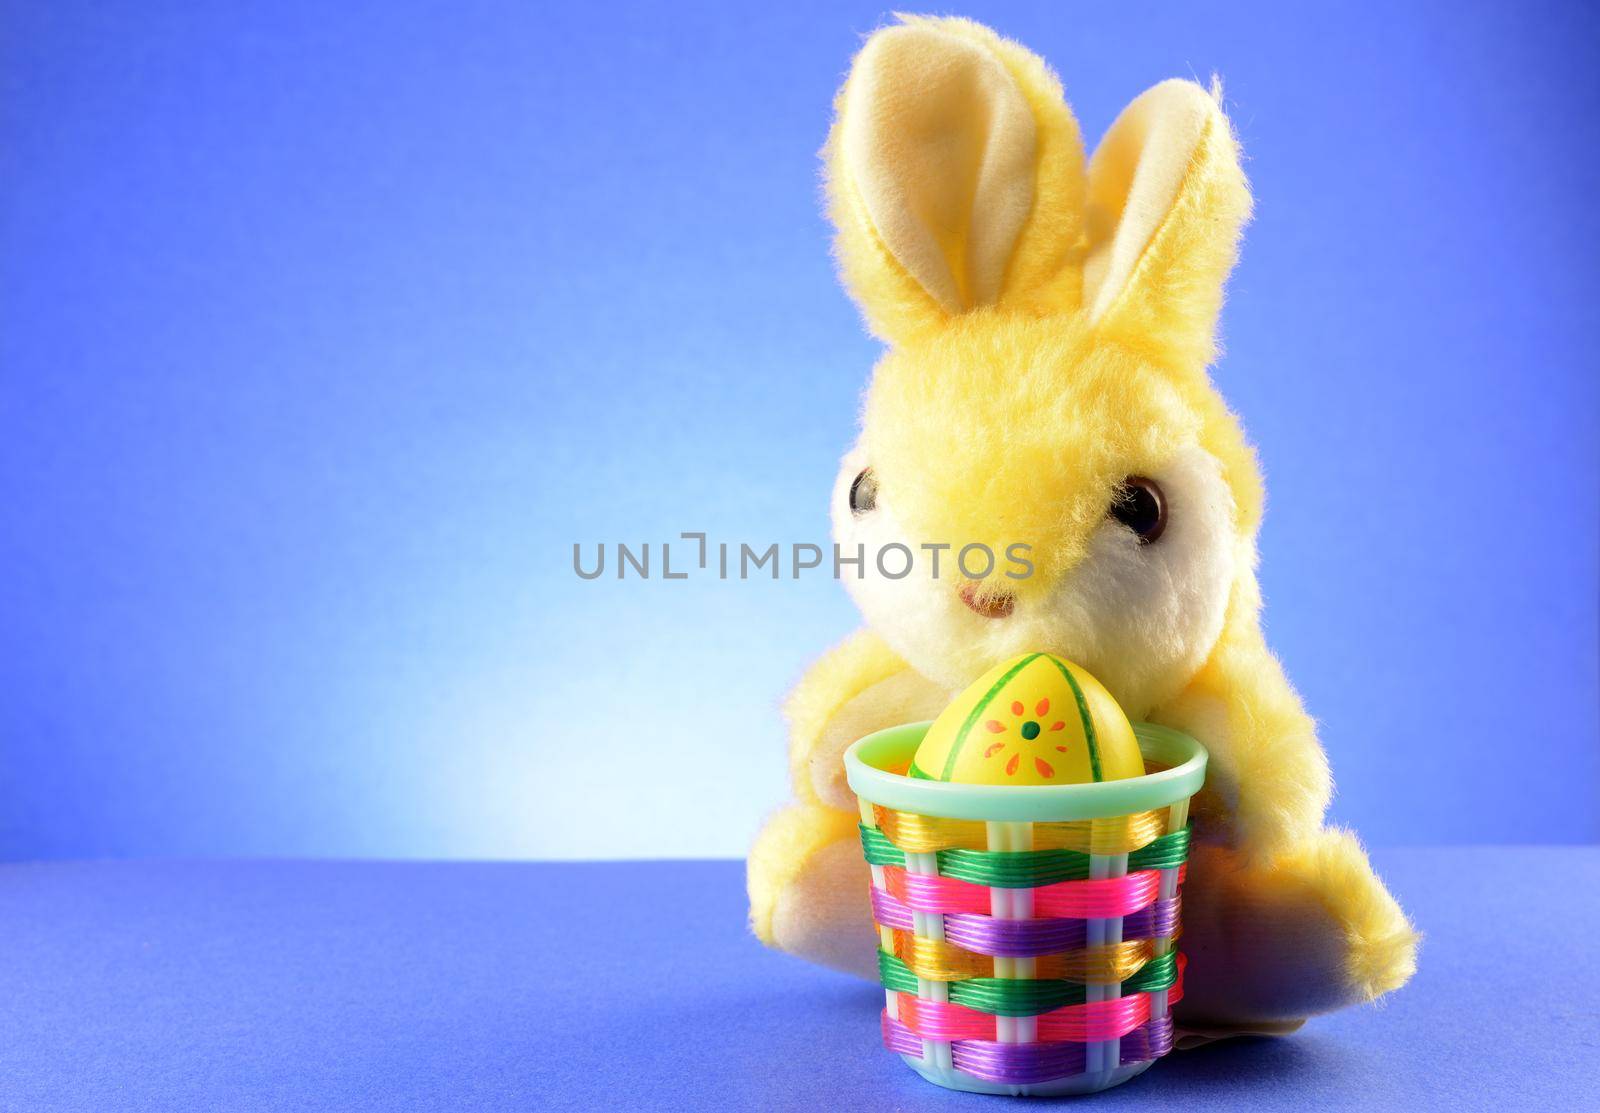 A plush yellow Easter Bunny for the holiday season.